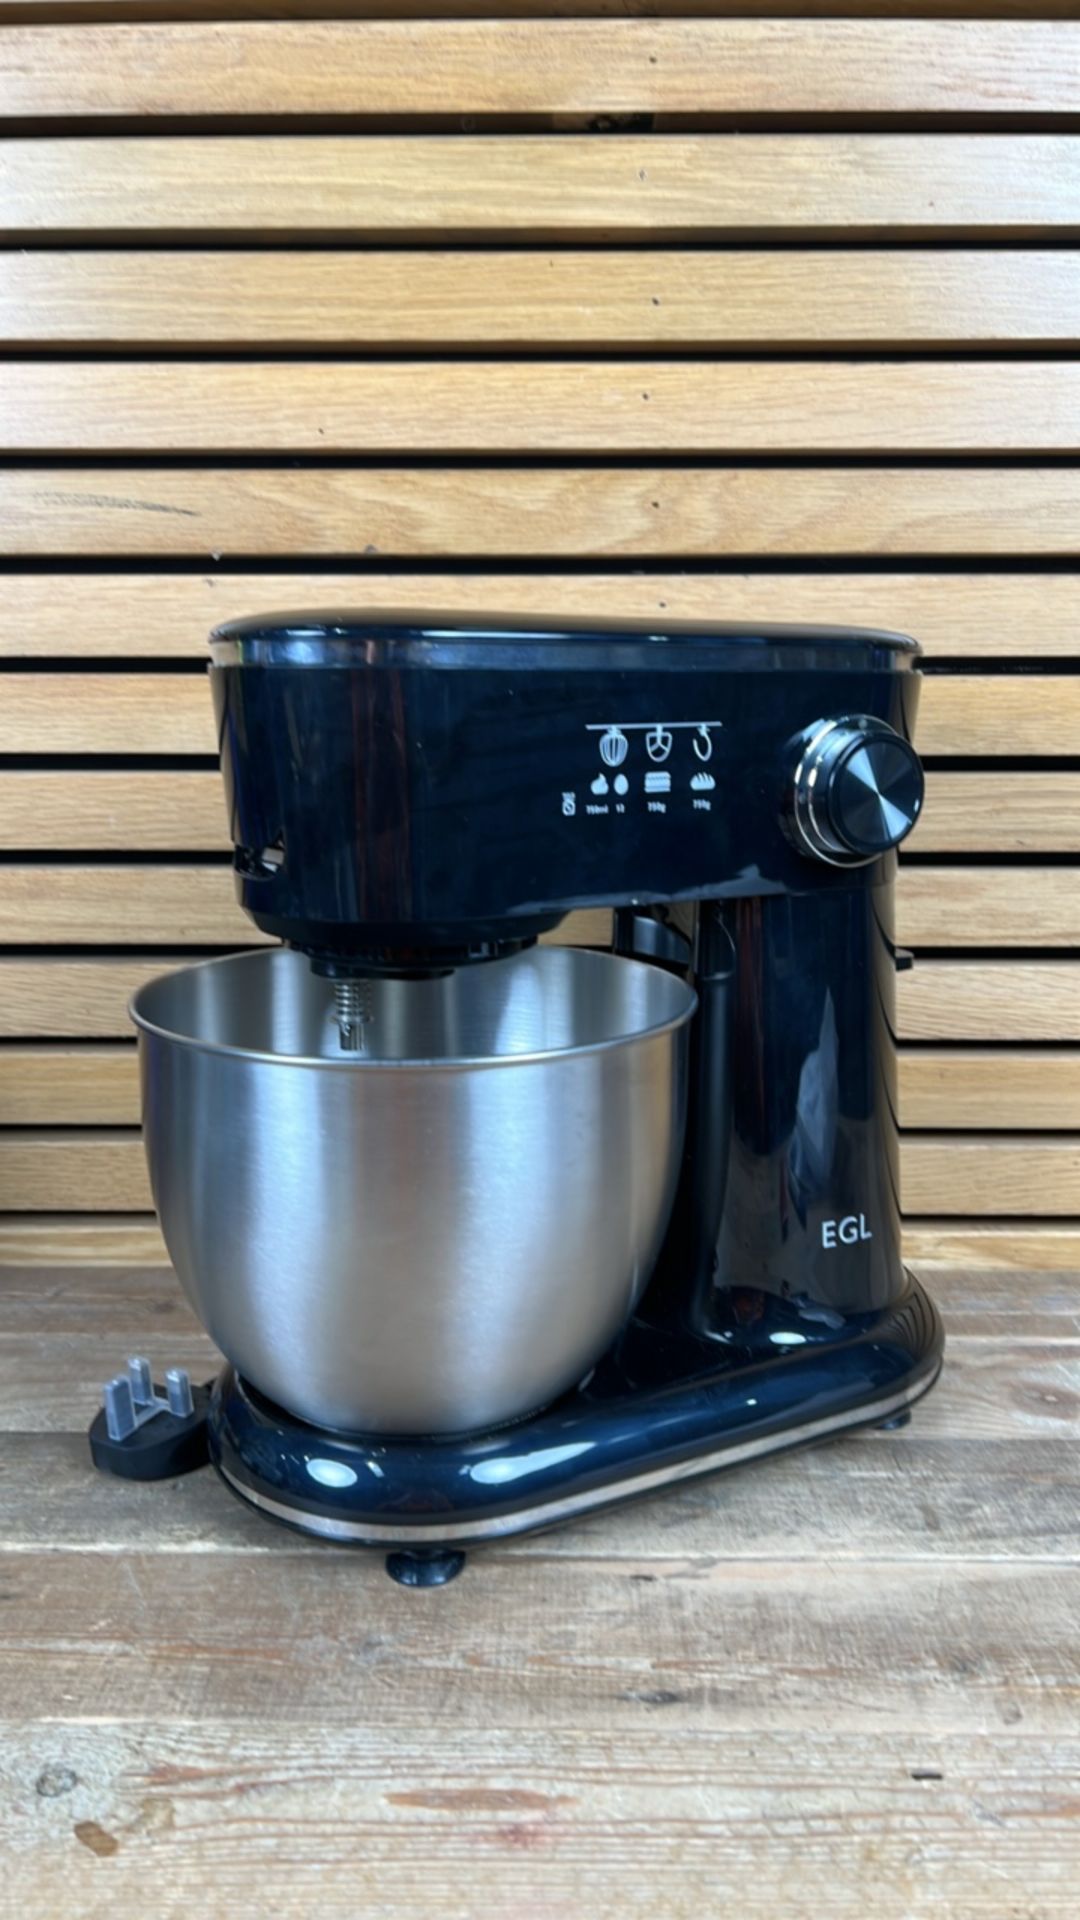 EGL 5 Litre Stand Mixer - Image 2 of 7